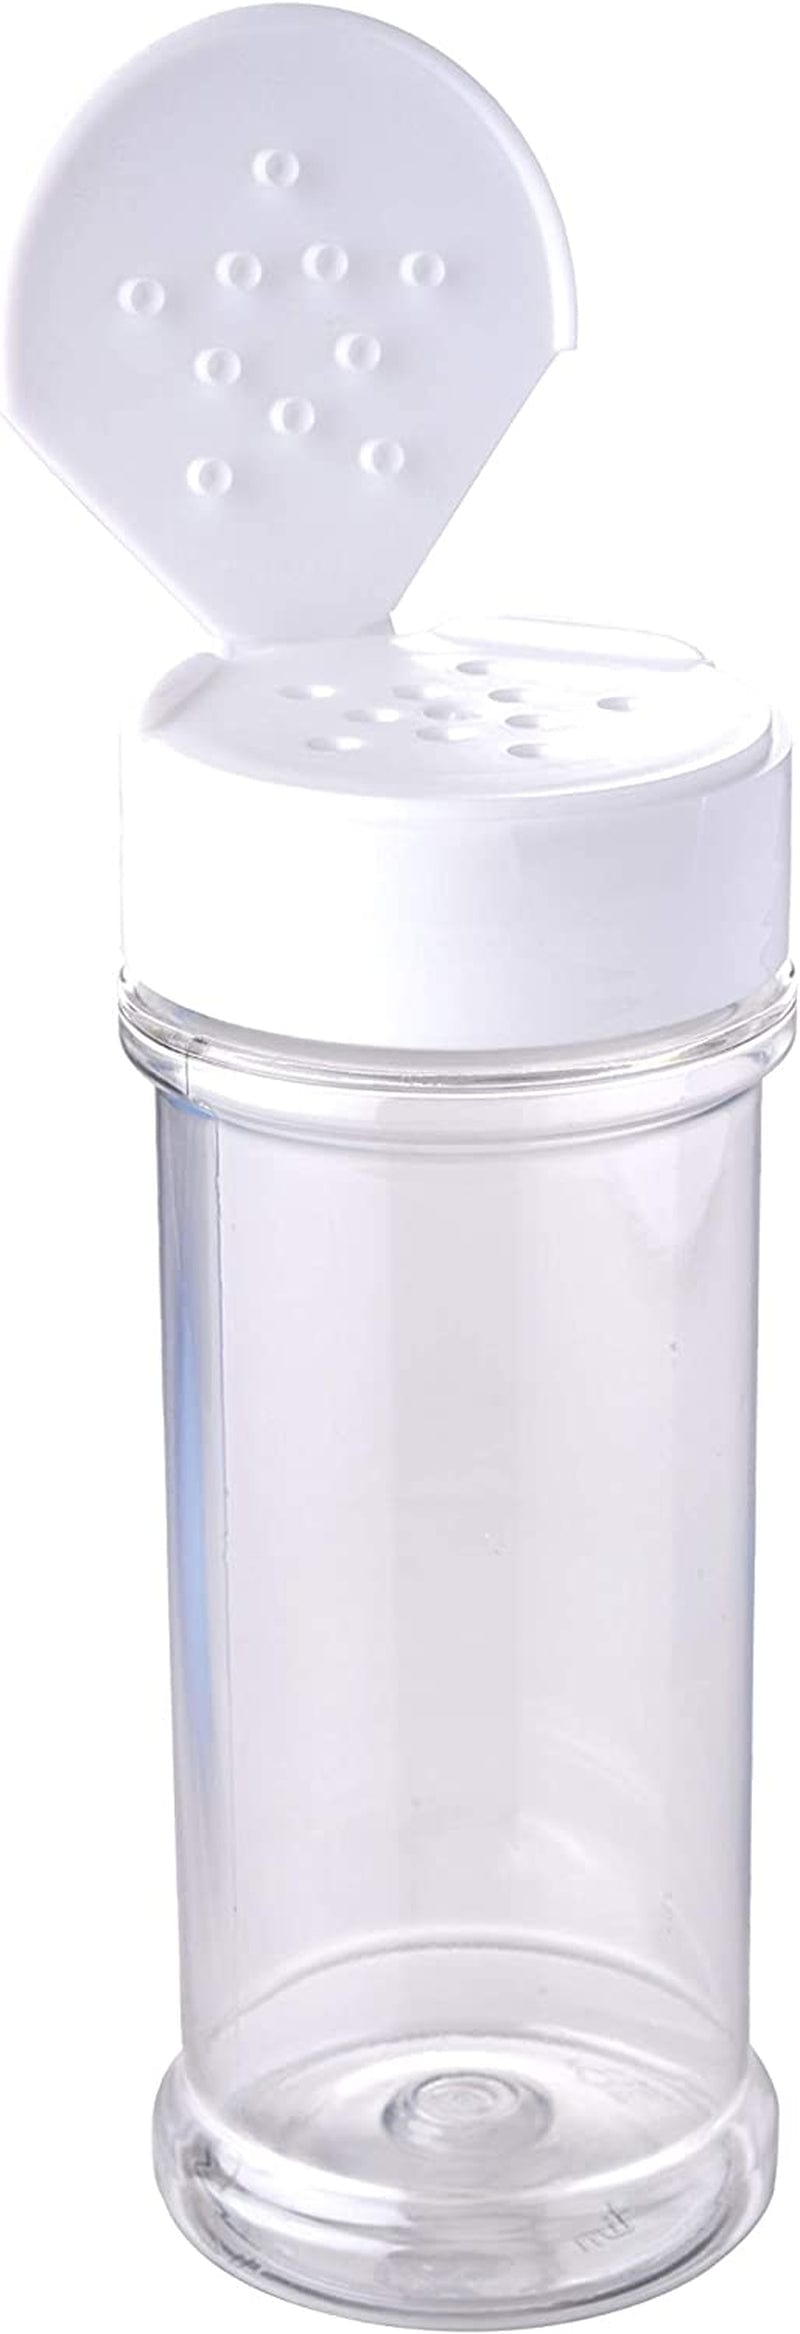 12 Pack of 6 Oz. Empty Clear Plastic Spice Bottles with White Sprinkle Top Lids for Storing and Dispensing Salt, Sweeteners and Spices - Food-Grade Spice Jars for Kitchen and Home Spice Organization